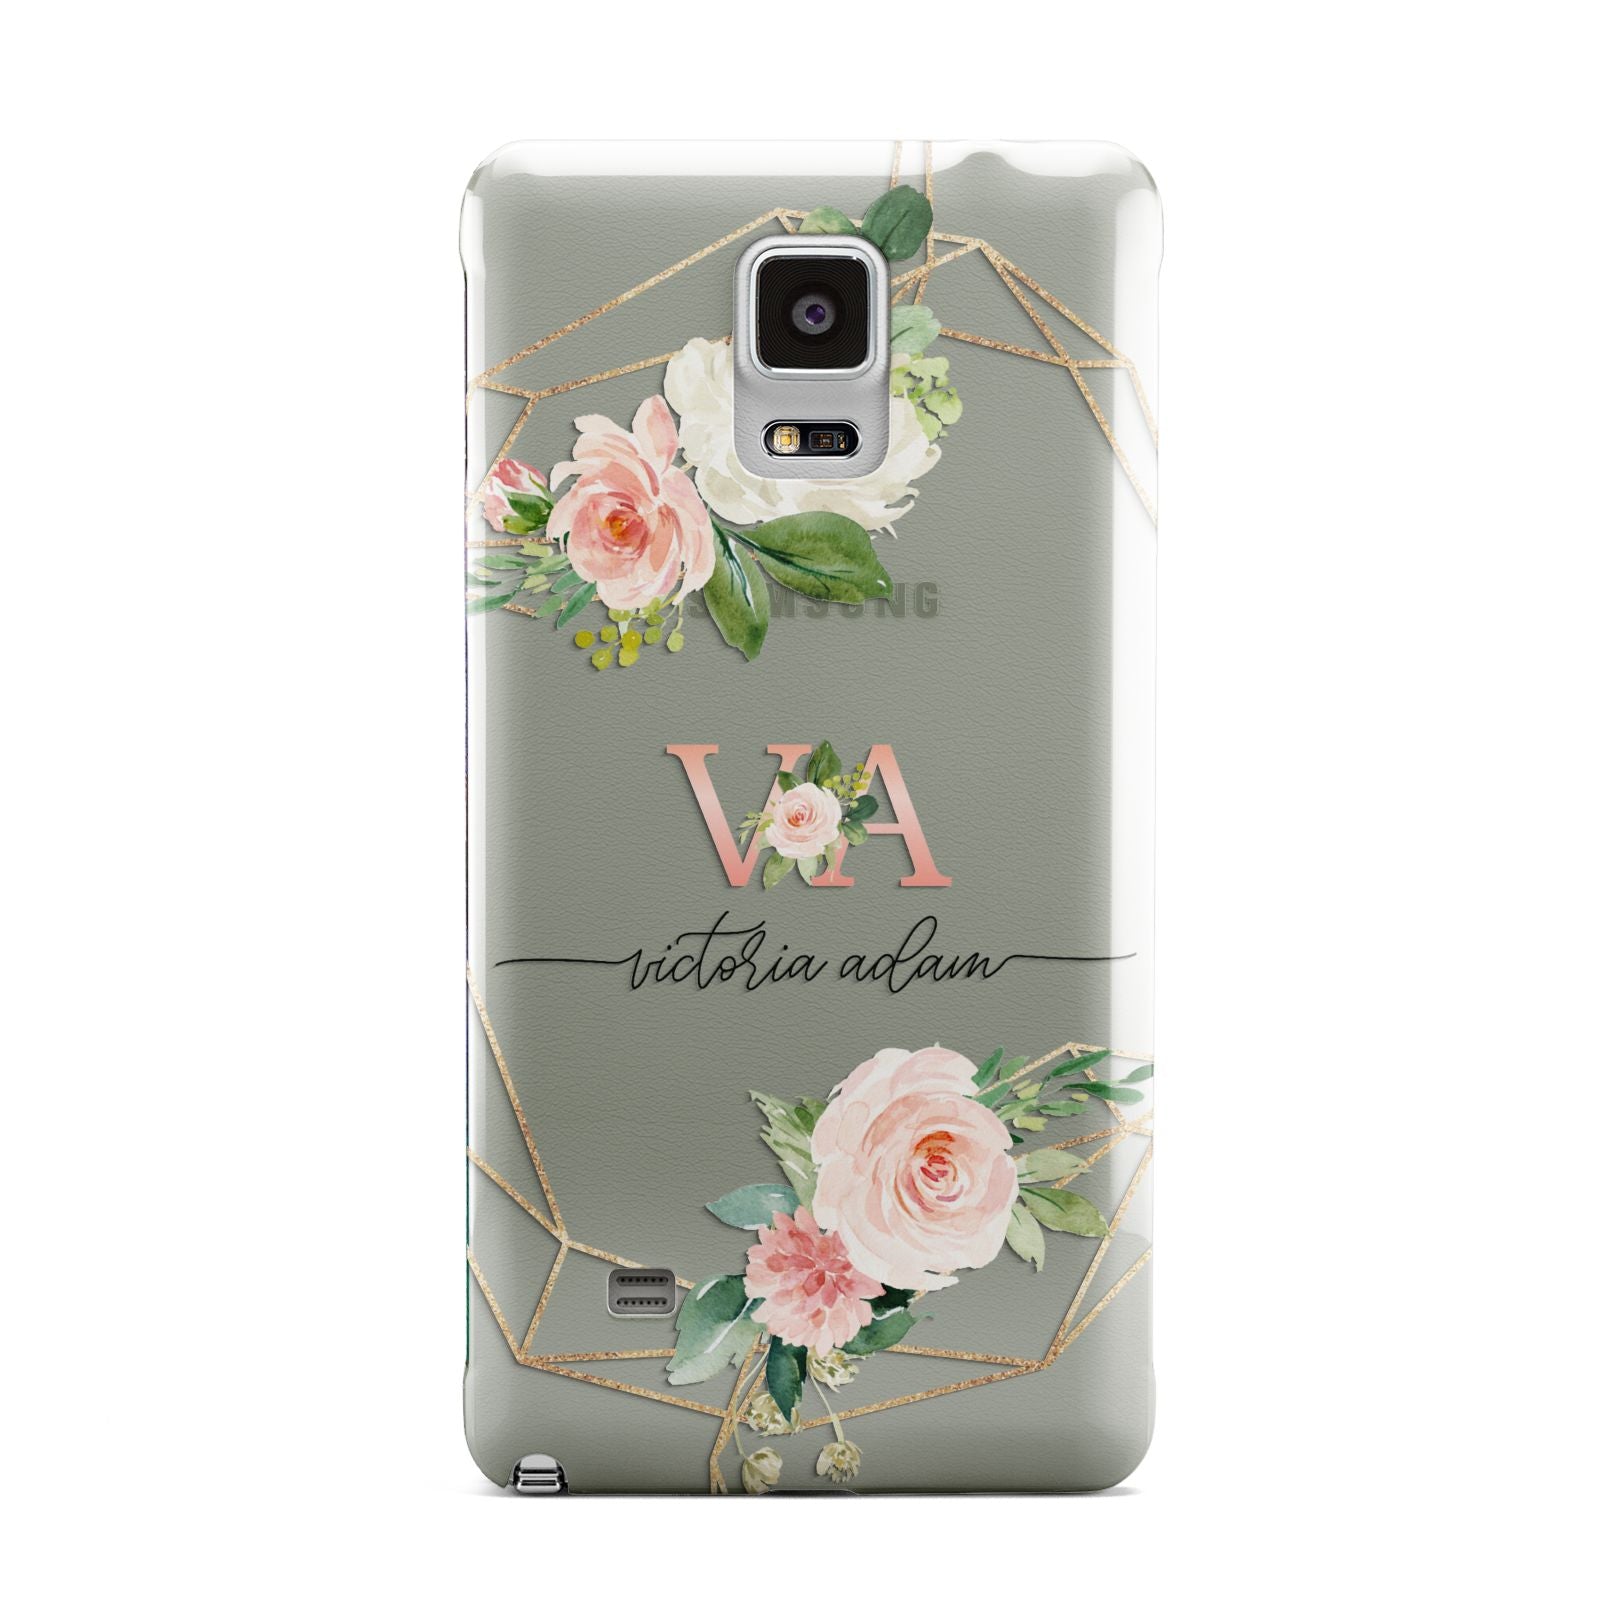 Blush Pink Rose Floral Personalised Samsung Galaxy Note 4 Case